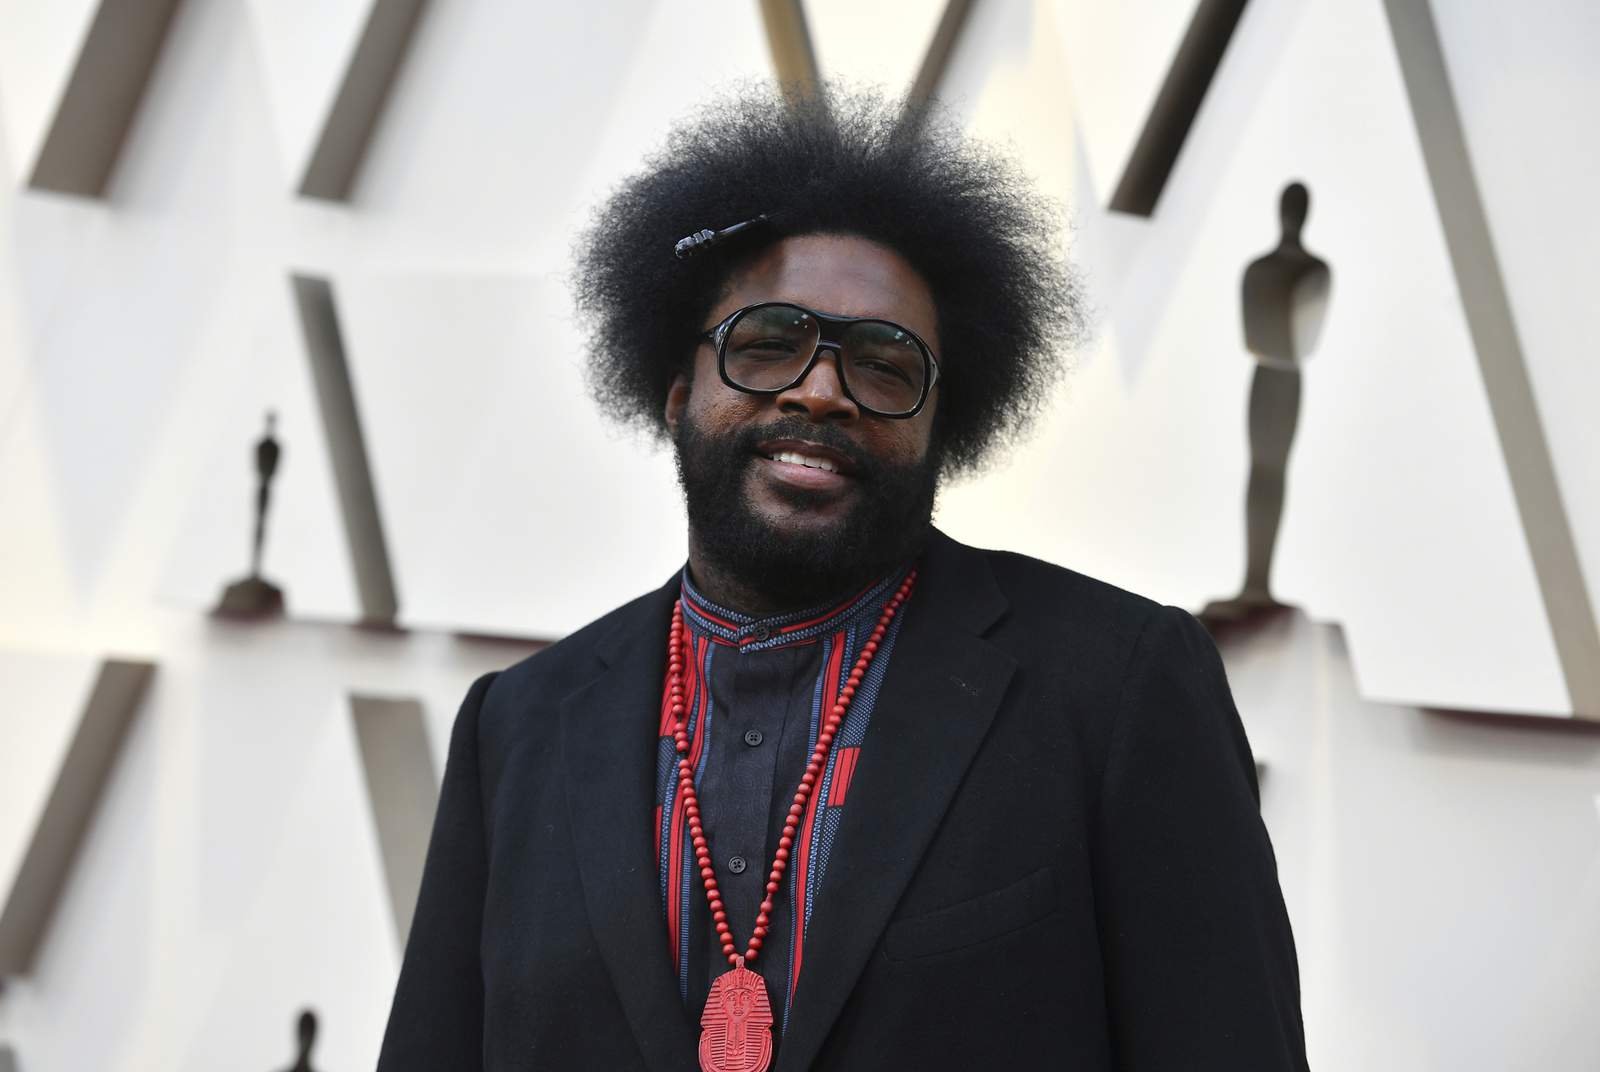 Questlove's quest: To find woman who bought him a turntable